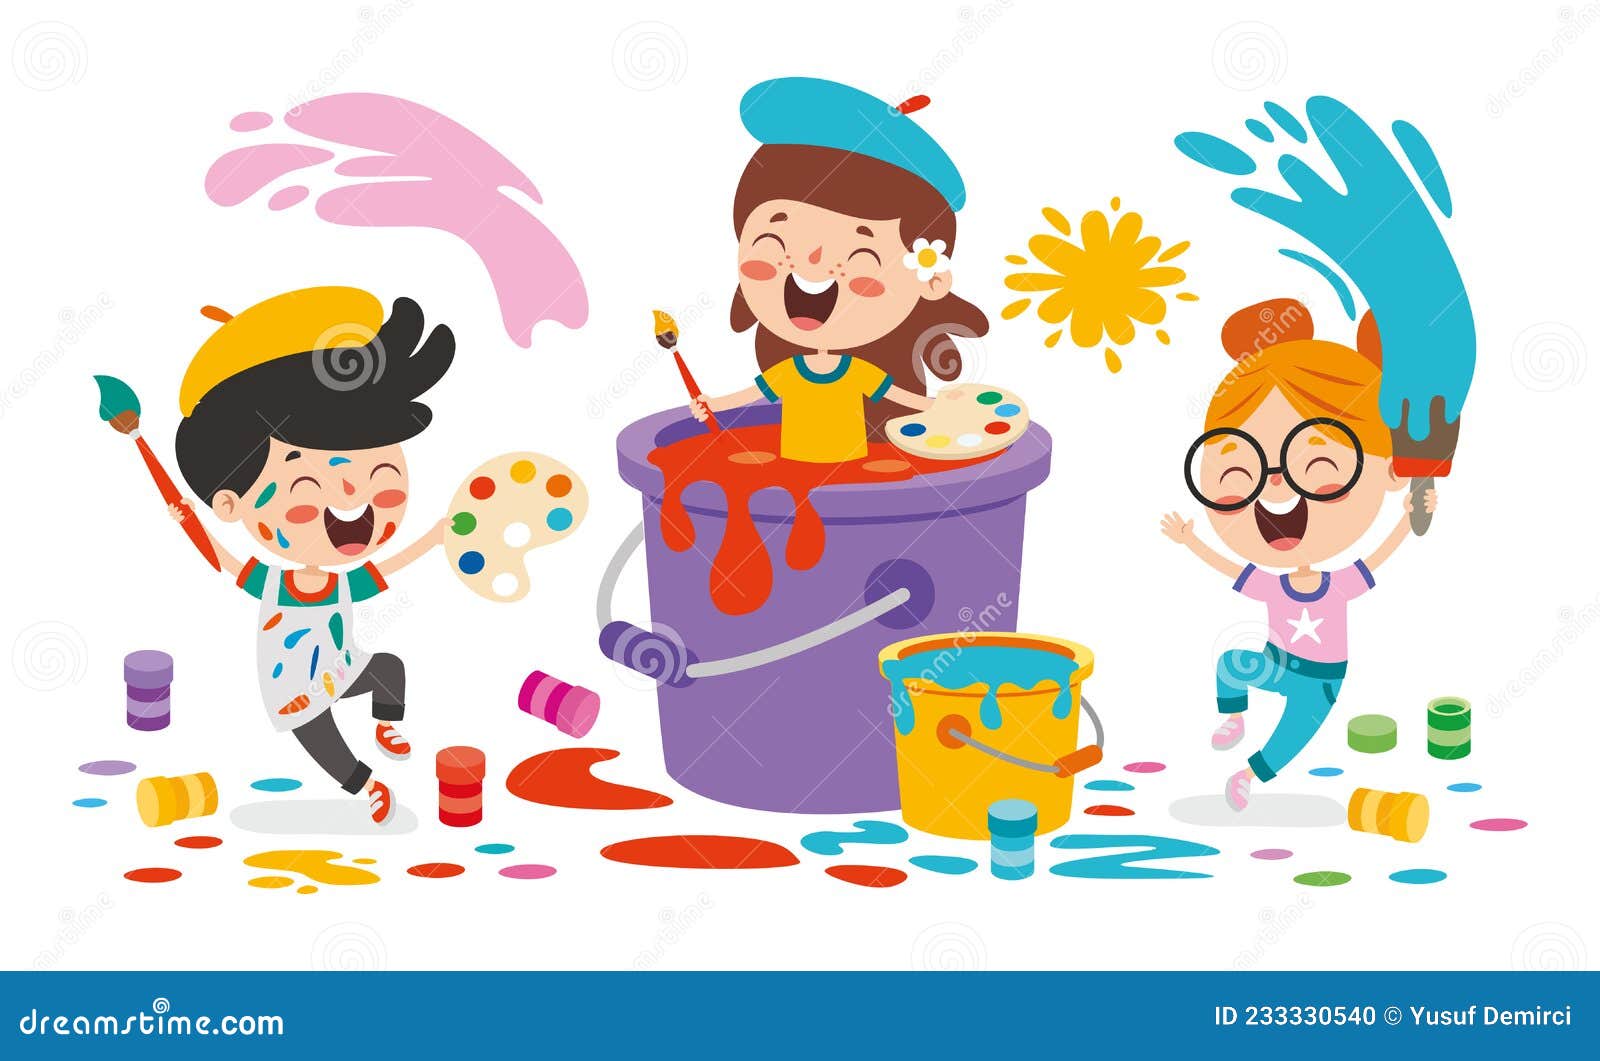 Funny Kid Coloring and Painting Stock Vector - Illustration of pages ...